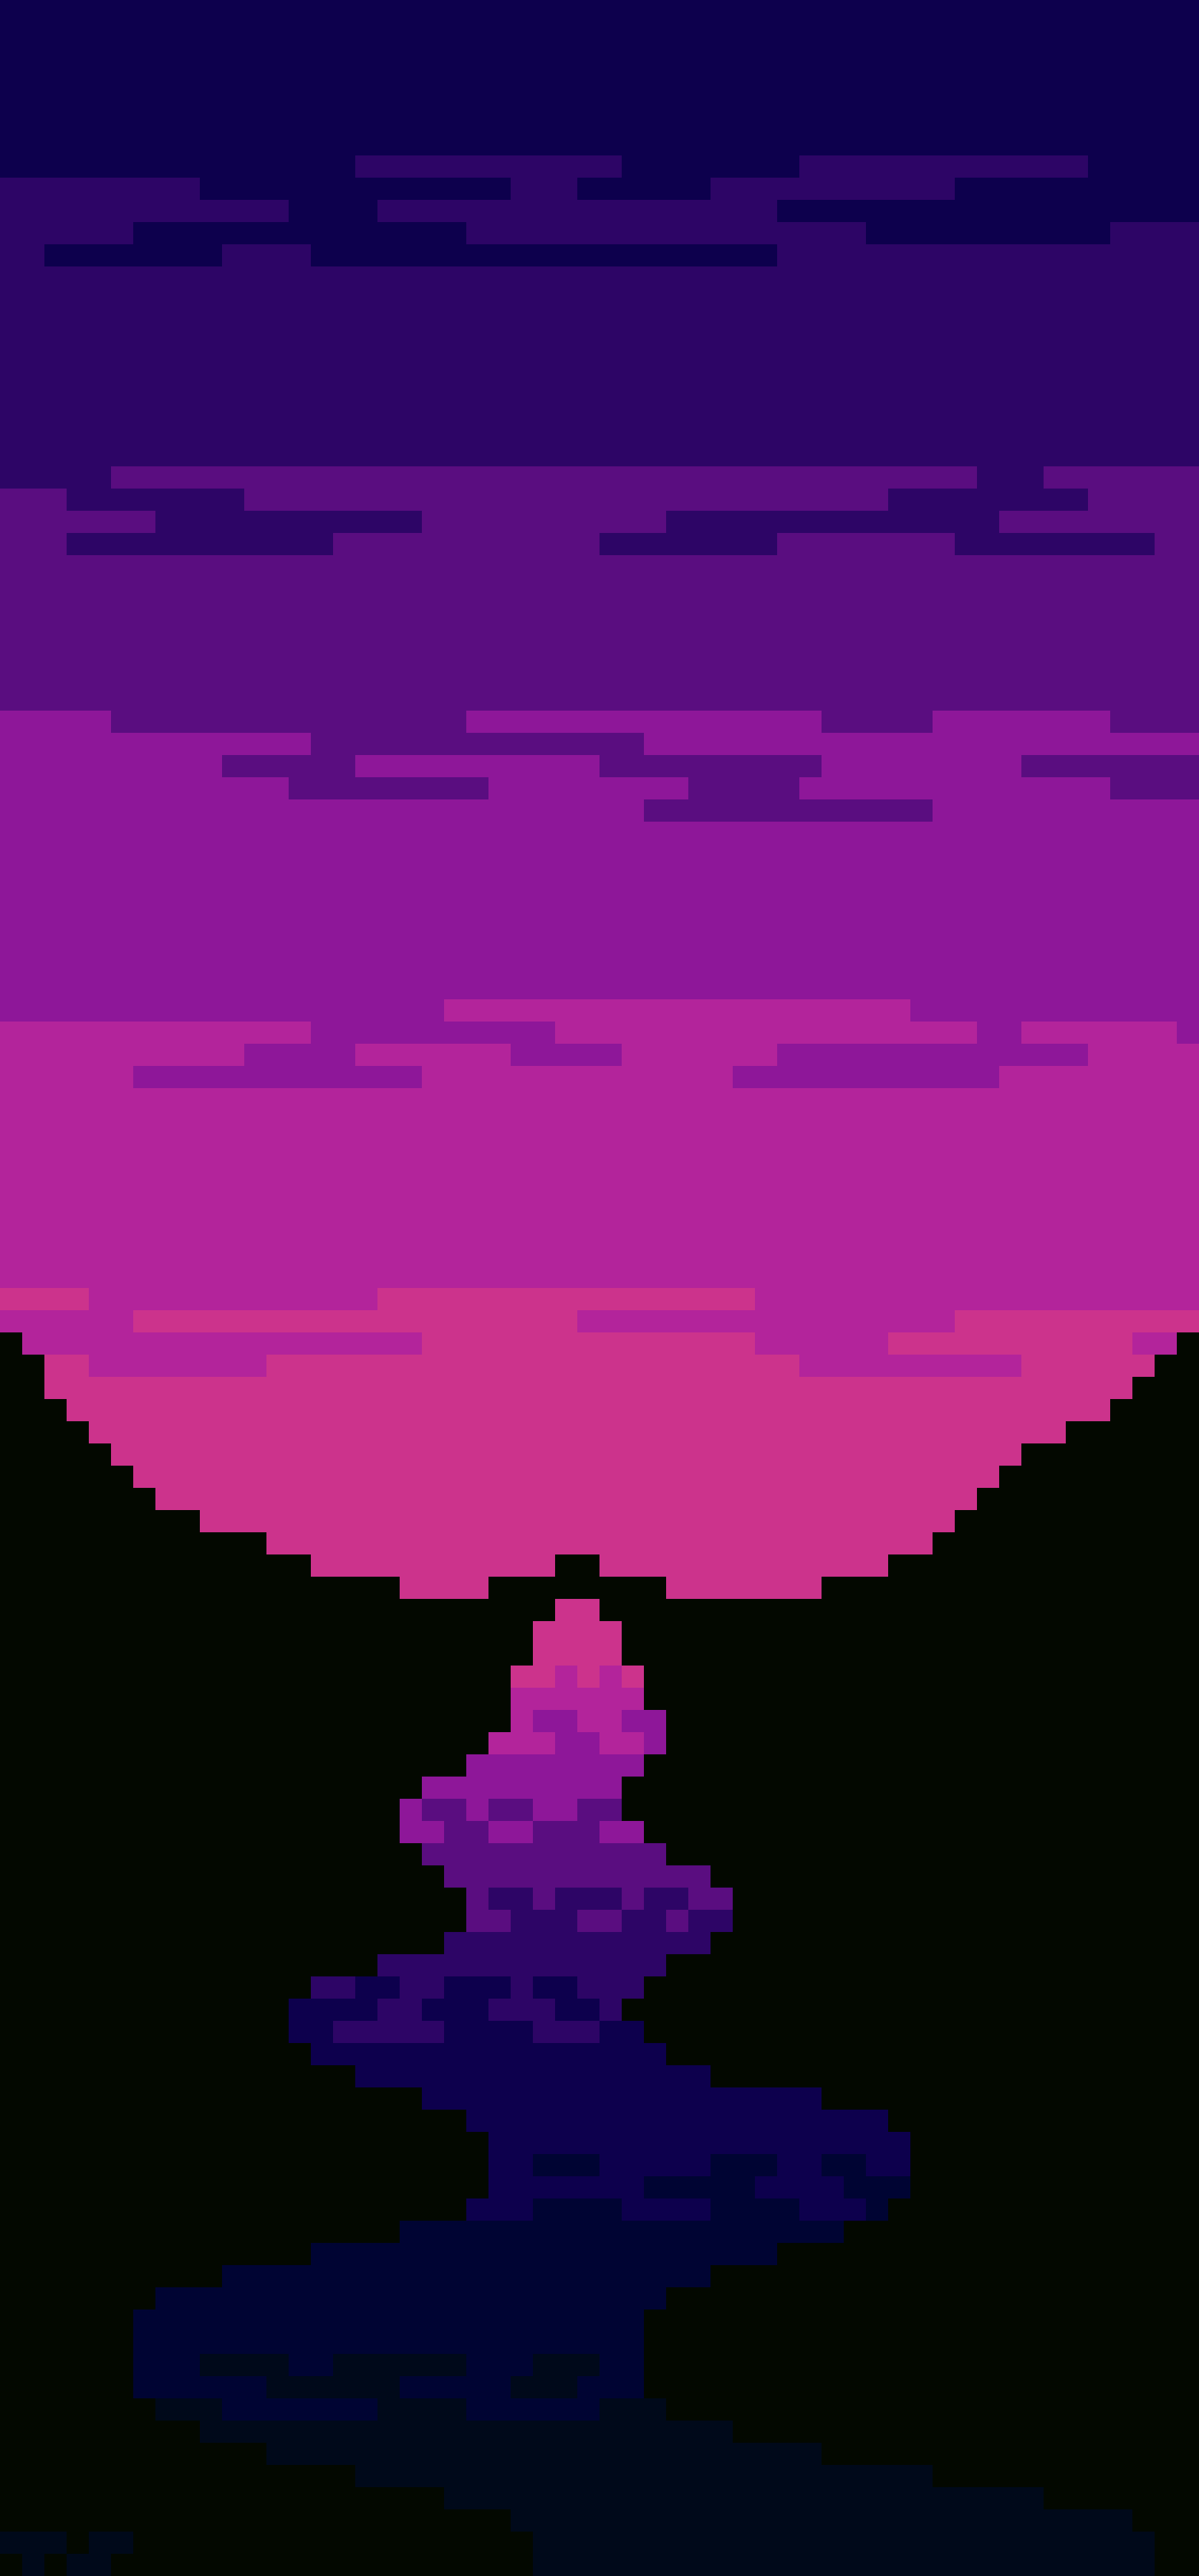 A pixelated image of the sunset - Pixel art